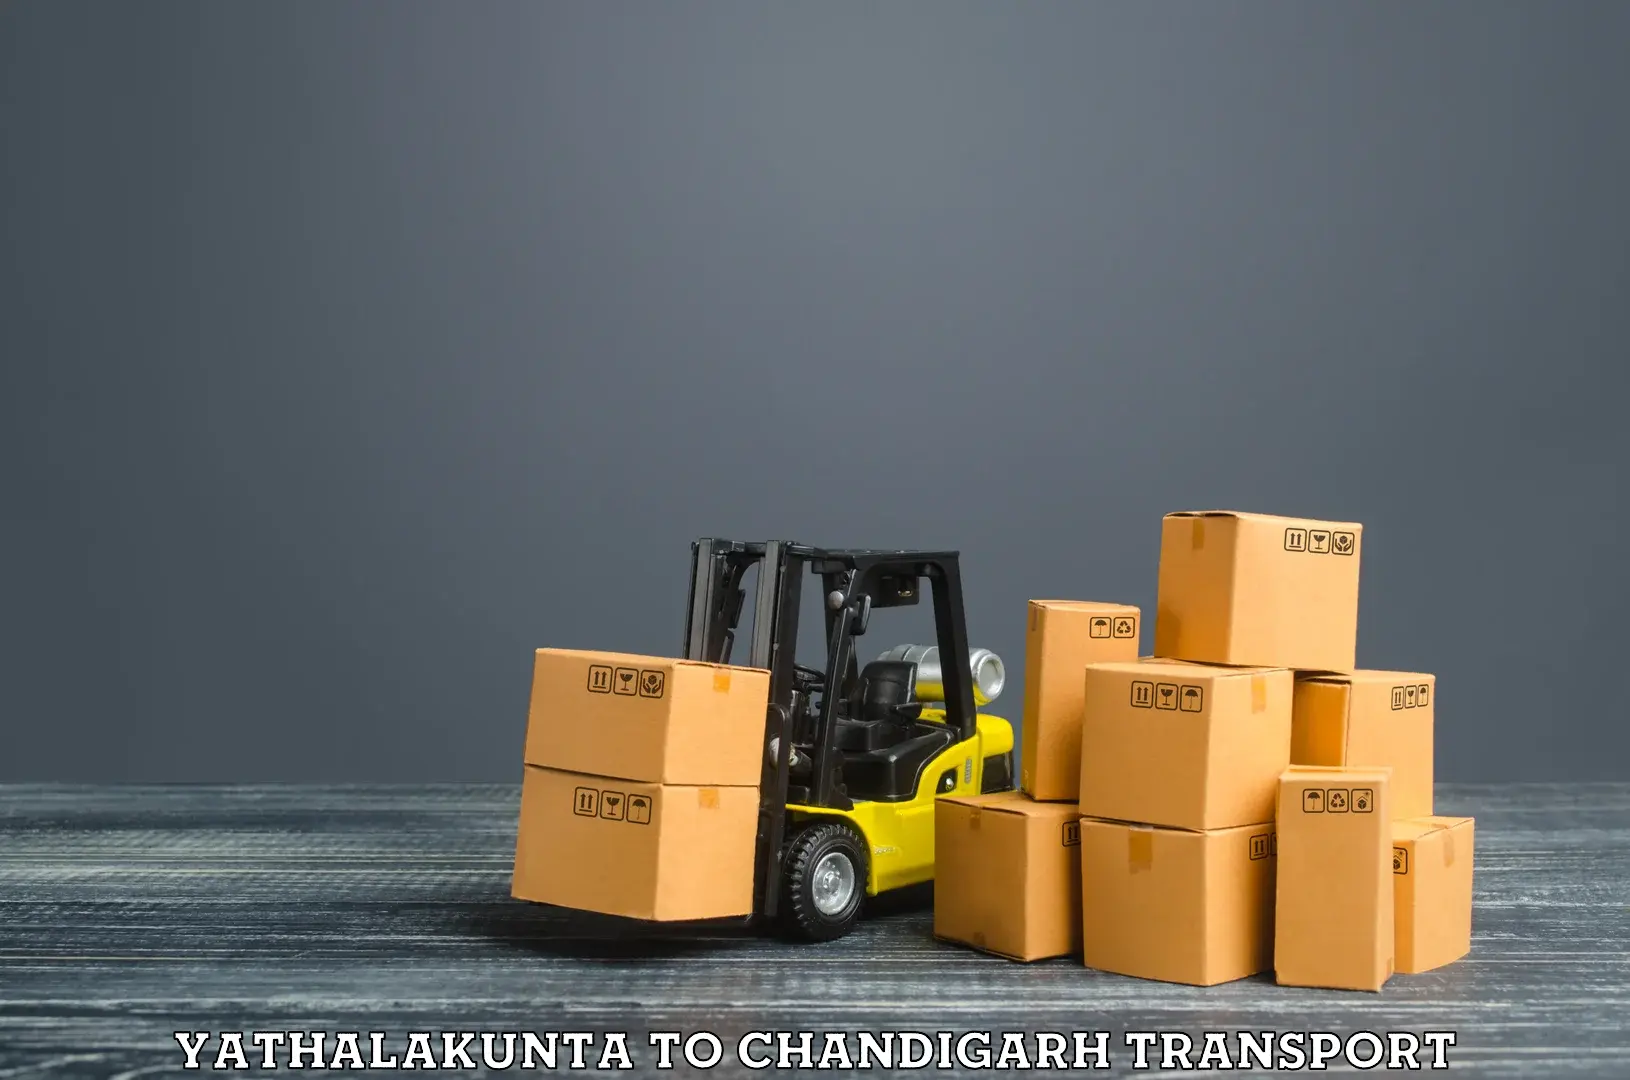 Delivery service Yathalakunta to Chandigarh